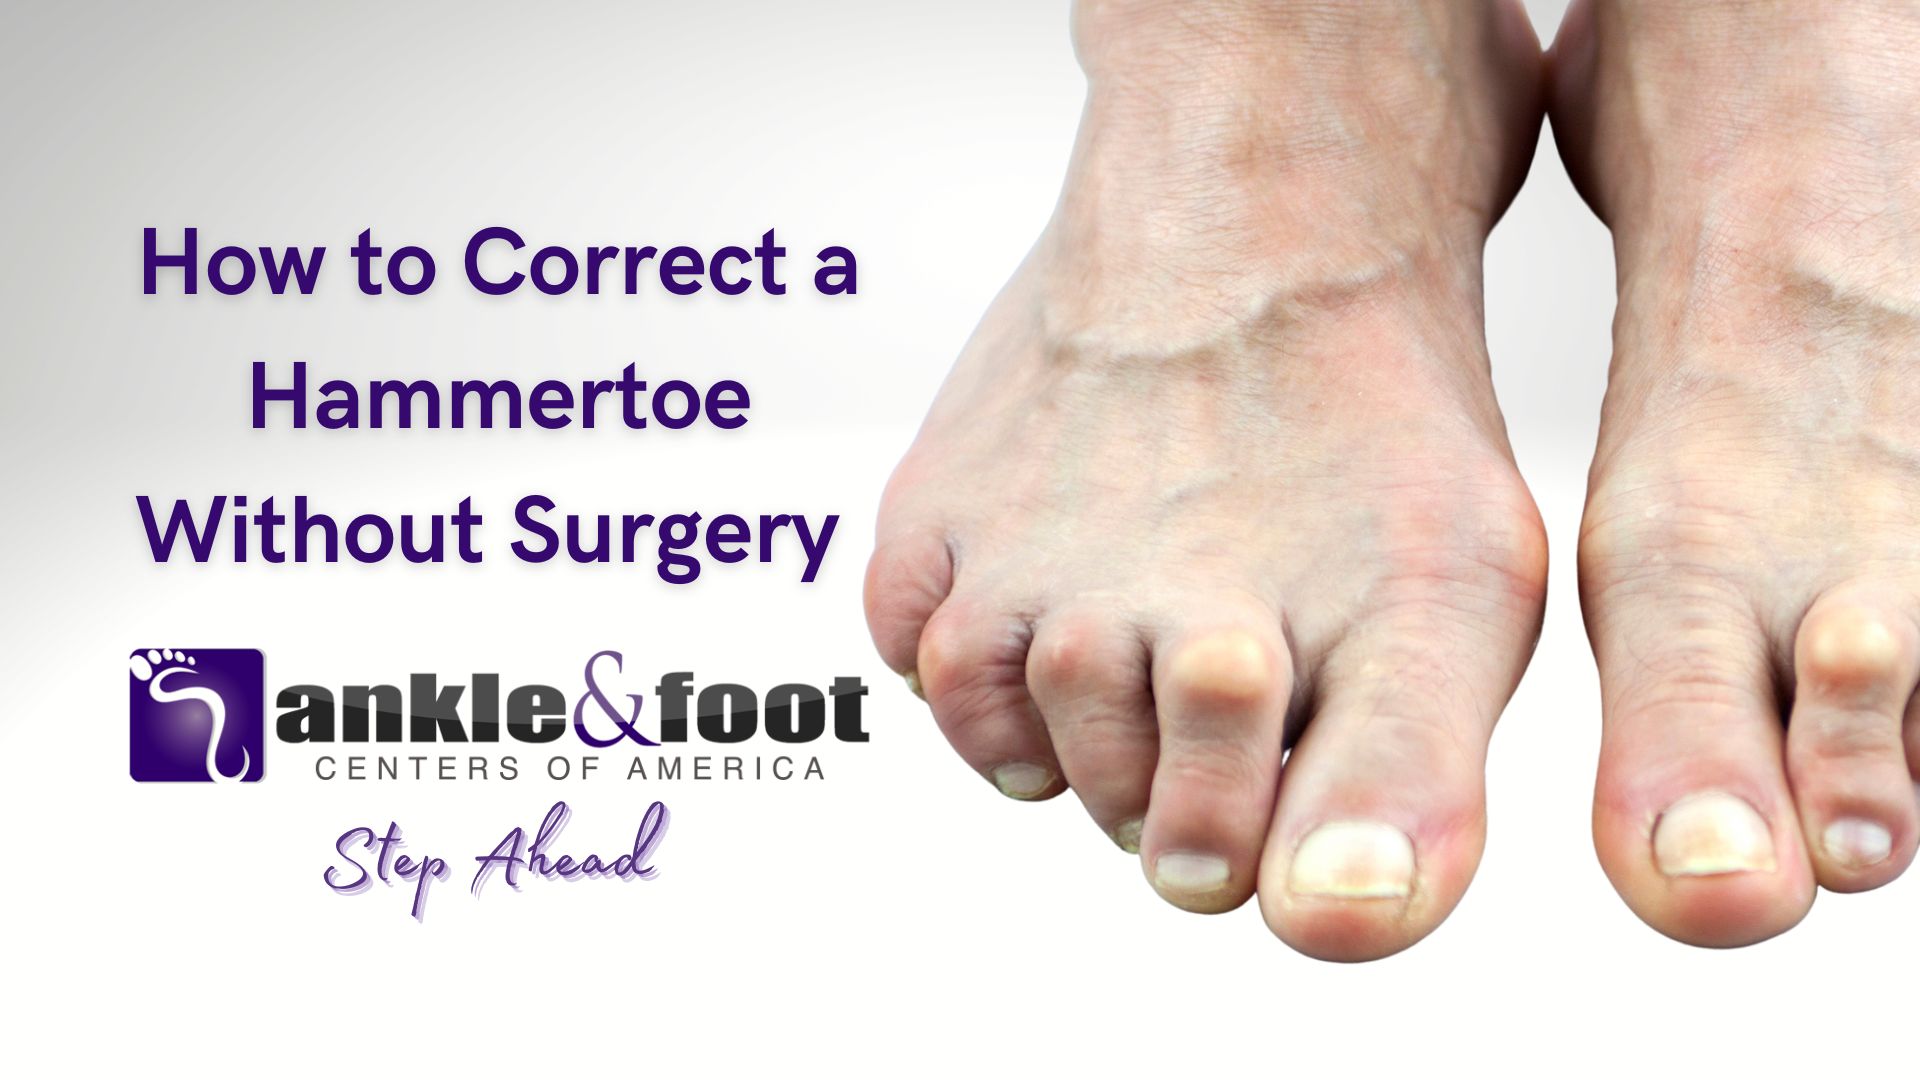 Non Surgical Treatment for Hammertoe